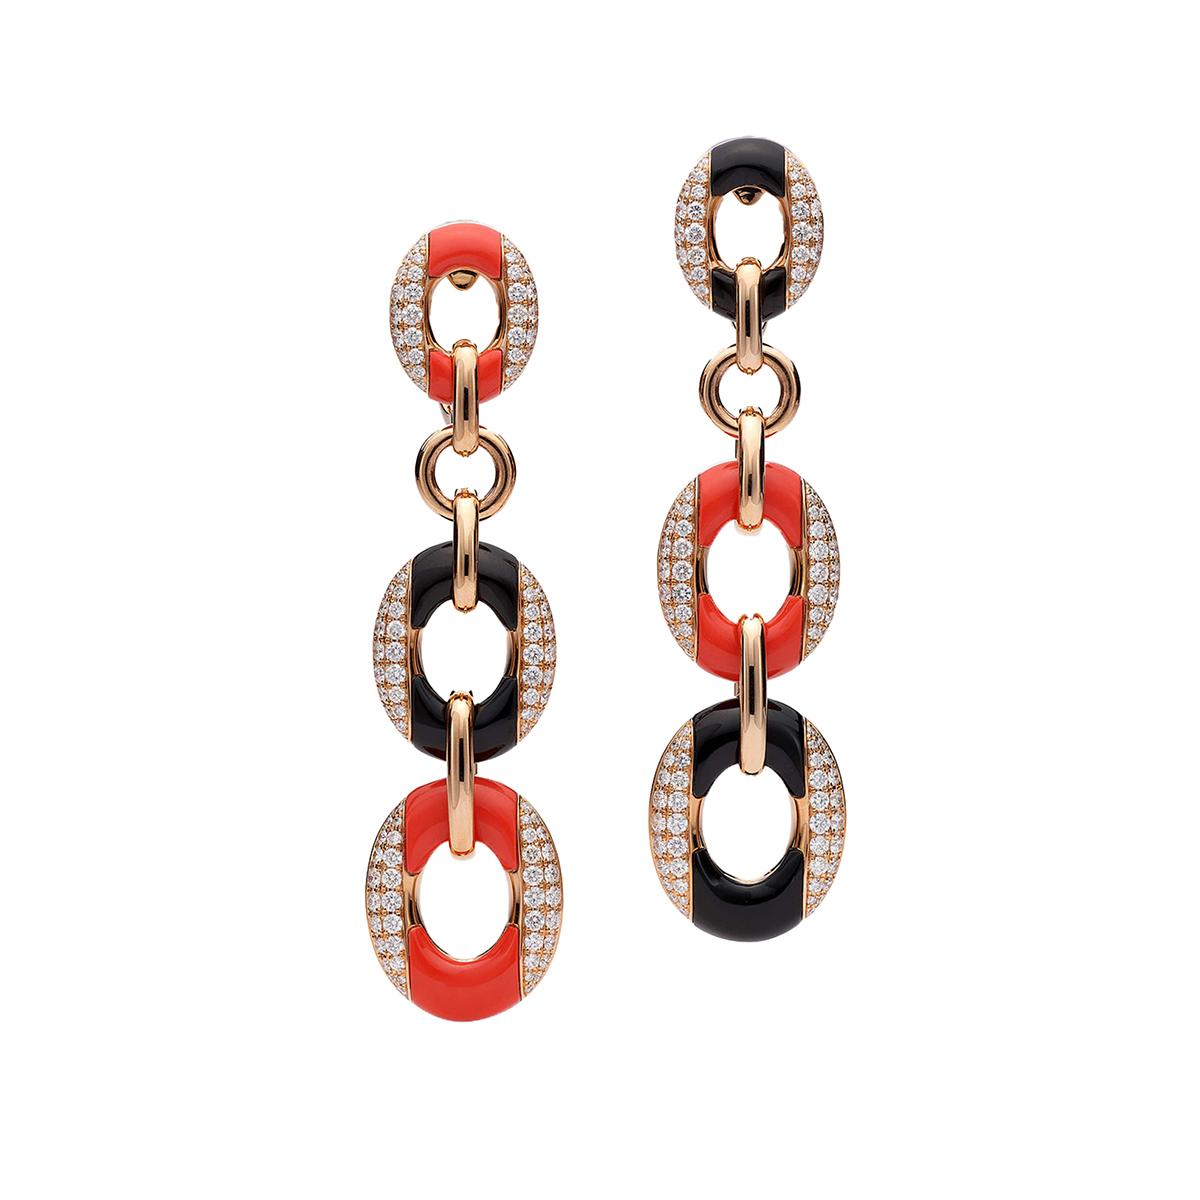 Earrings in 18kt pink gold set with 224 diamonds 3.34 cts, 7 coral and 7 onyx 7.12 cts    